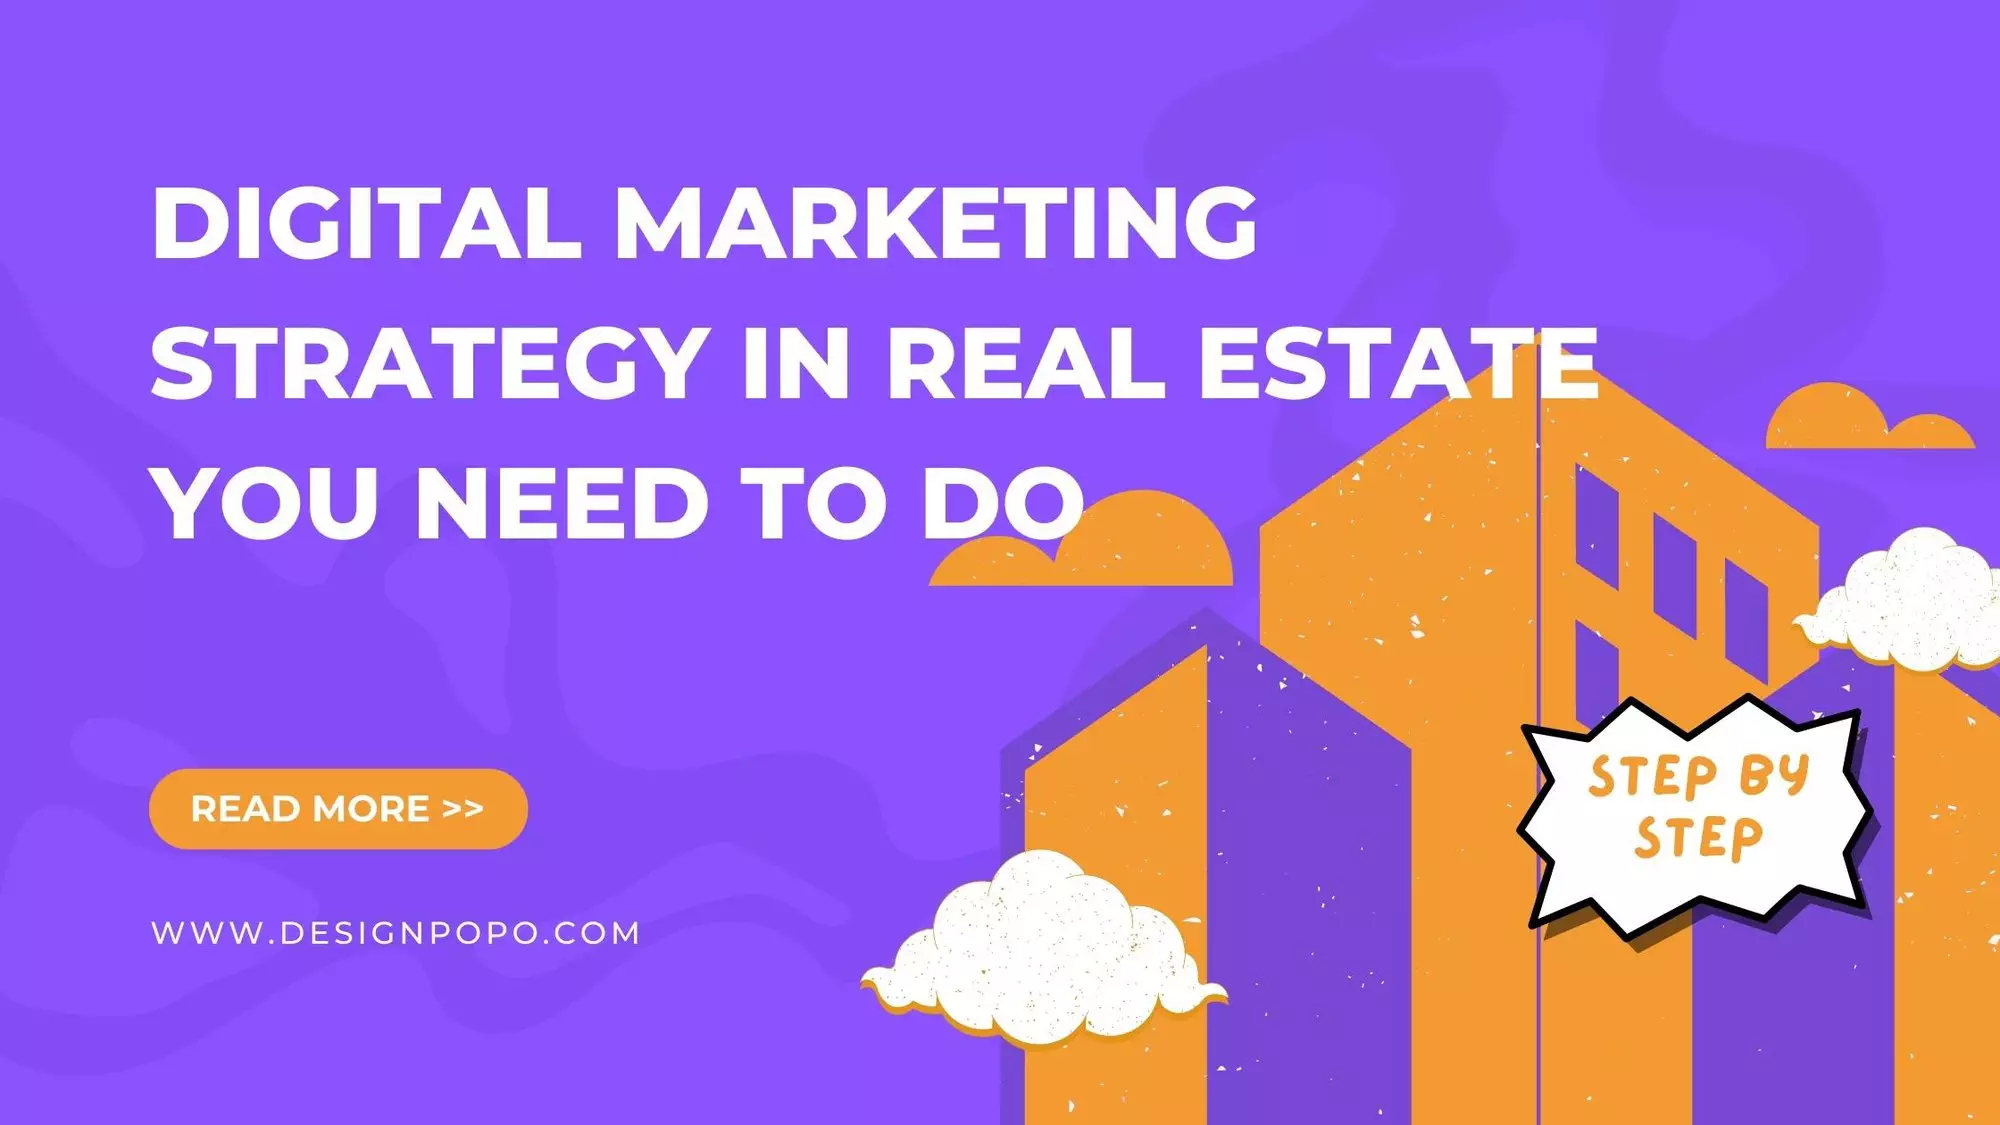 Digital Marketing Strategy in Real Estate You Need to Do: Step-by-step